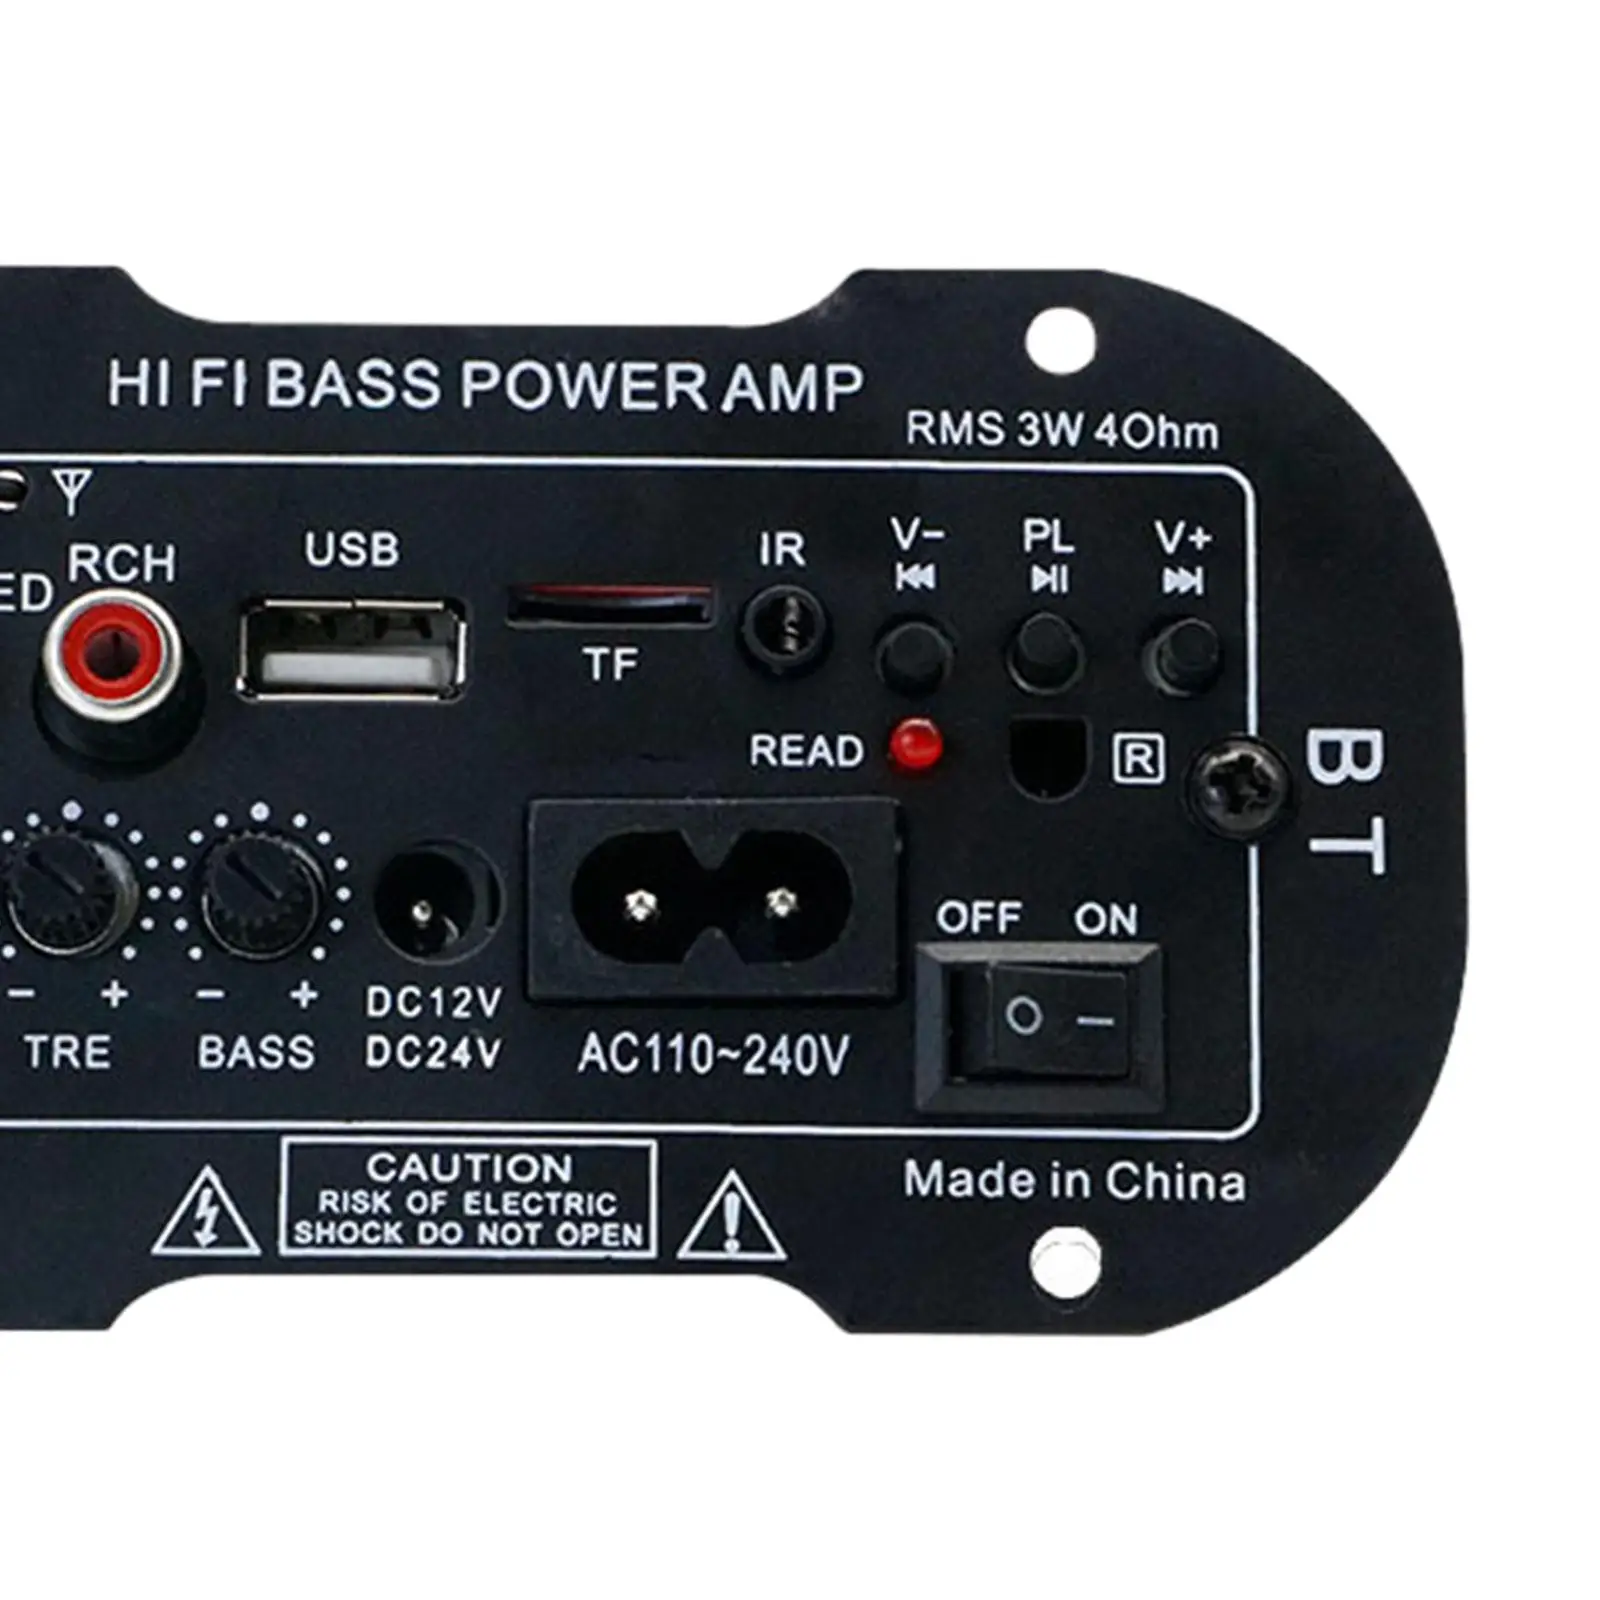 Amplifier Board EU Adapter High Power USB Bass Universal Multifunction with Speaker Stereo Amplifier for Store Home Theater Car